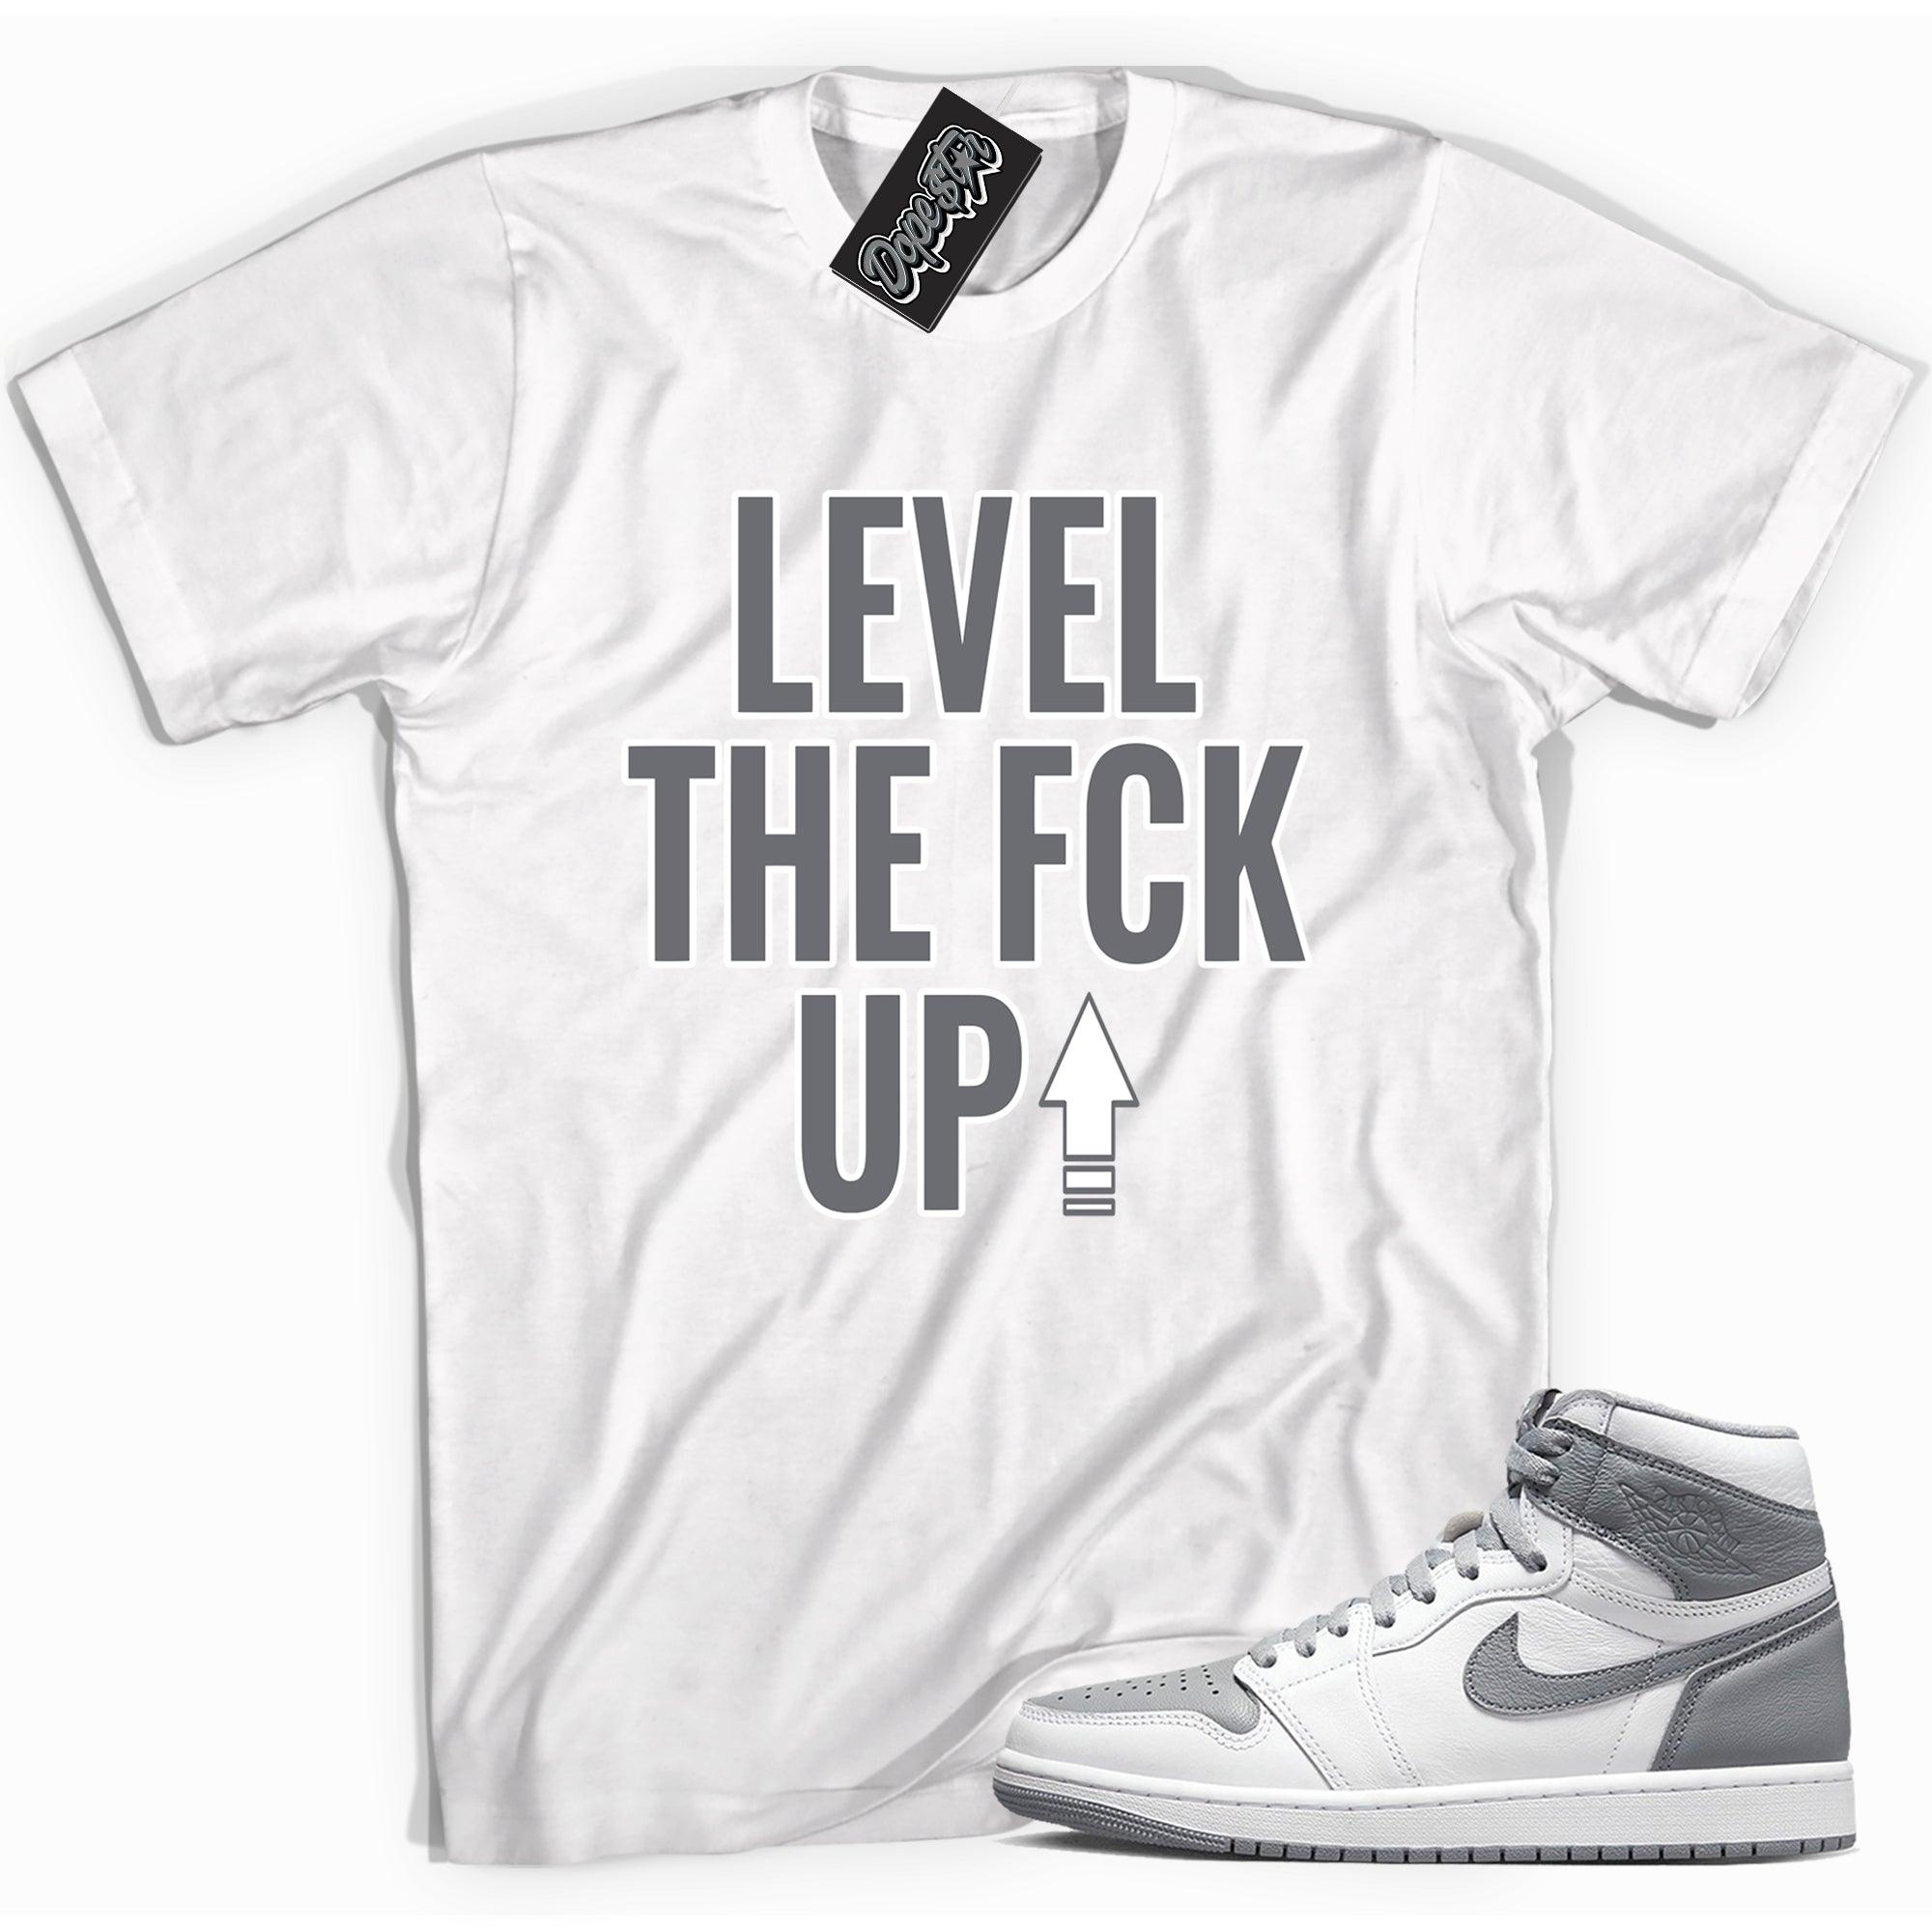 Cool white graphic tee with 'Level Up' print, that perfectly matches Air Jordan 1 High OG Stealth sneakers.